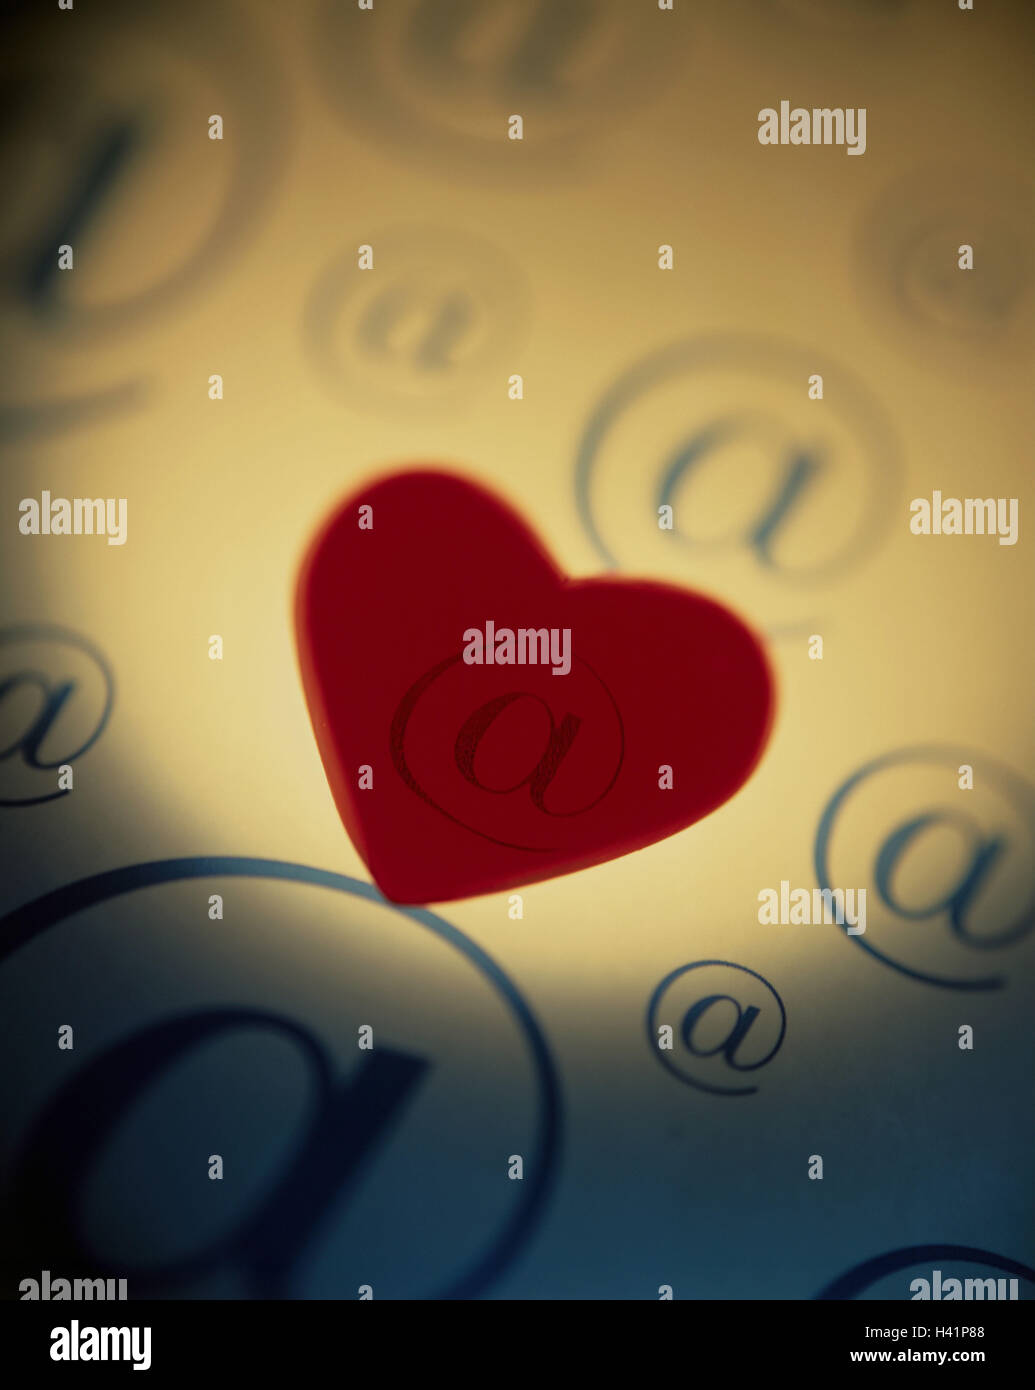 Heart, At icons, icon, online love, Still life, conception, love, communication, Internet, chat, Internet, e-mail, feelings, partner's search, luck, emotion, connection, contact, romantically, falls in love, declaration love, respect, friendship, warmth, Stock Photo